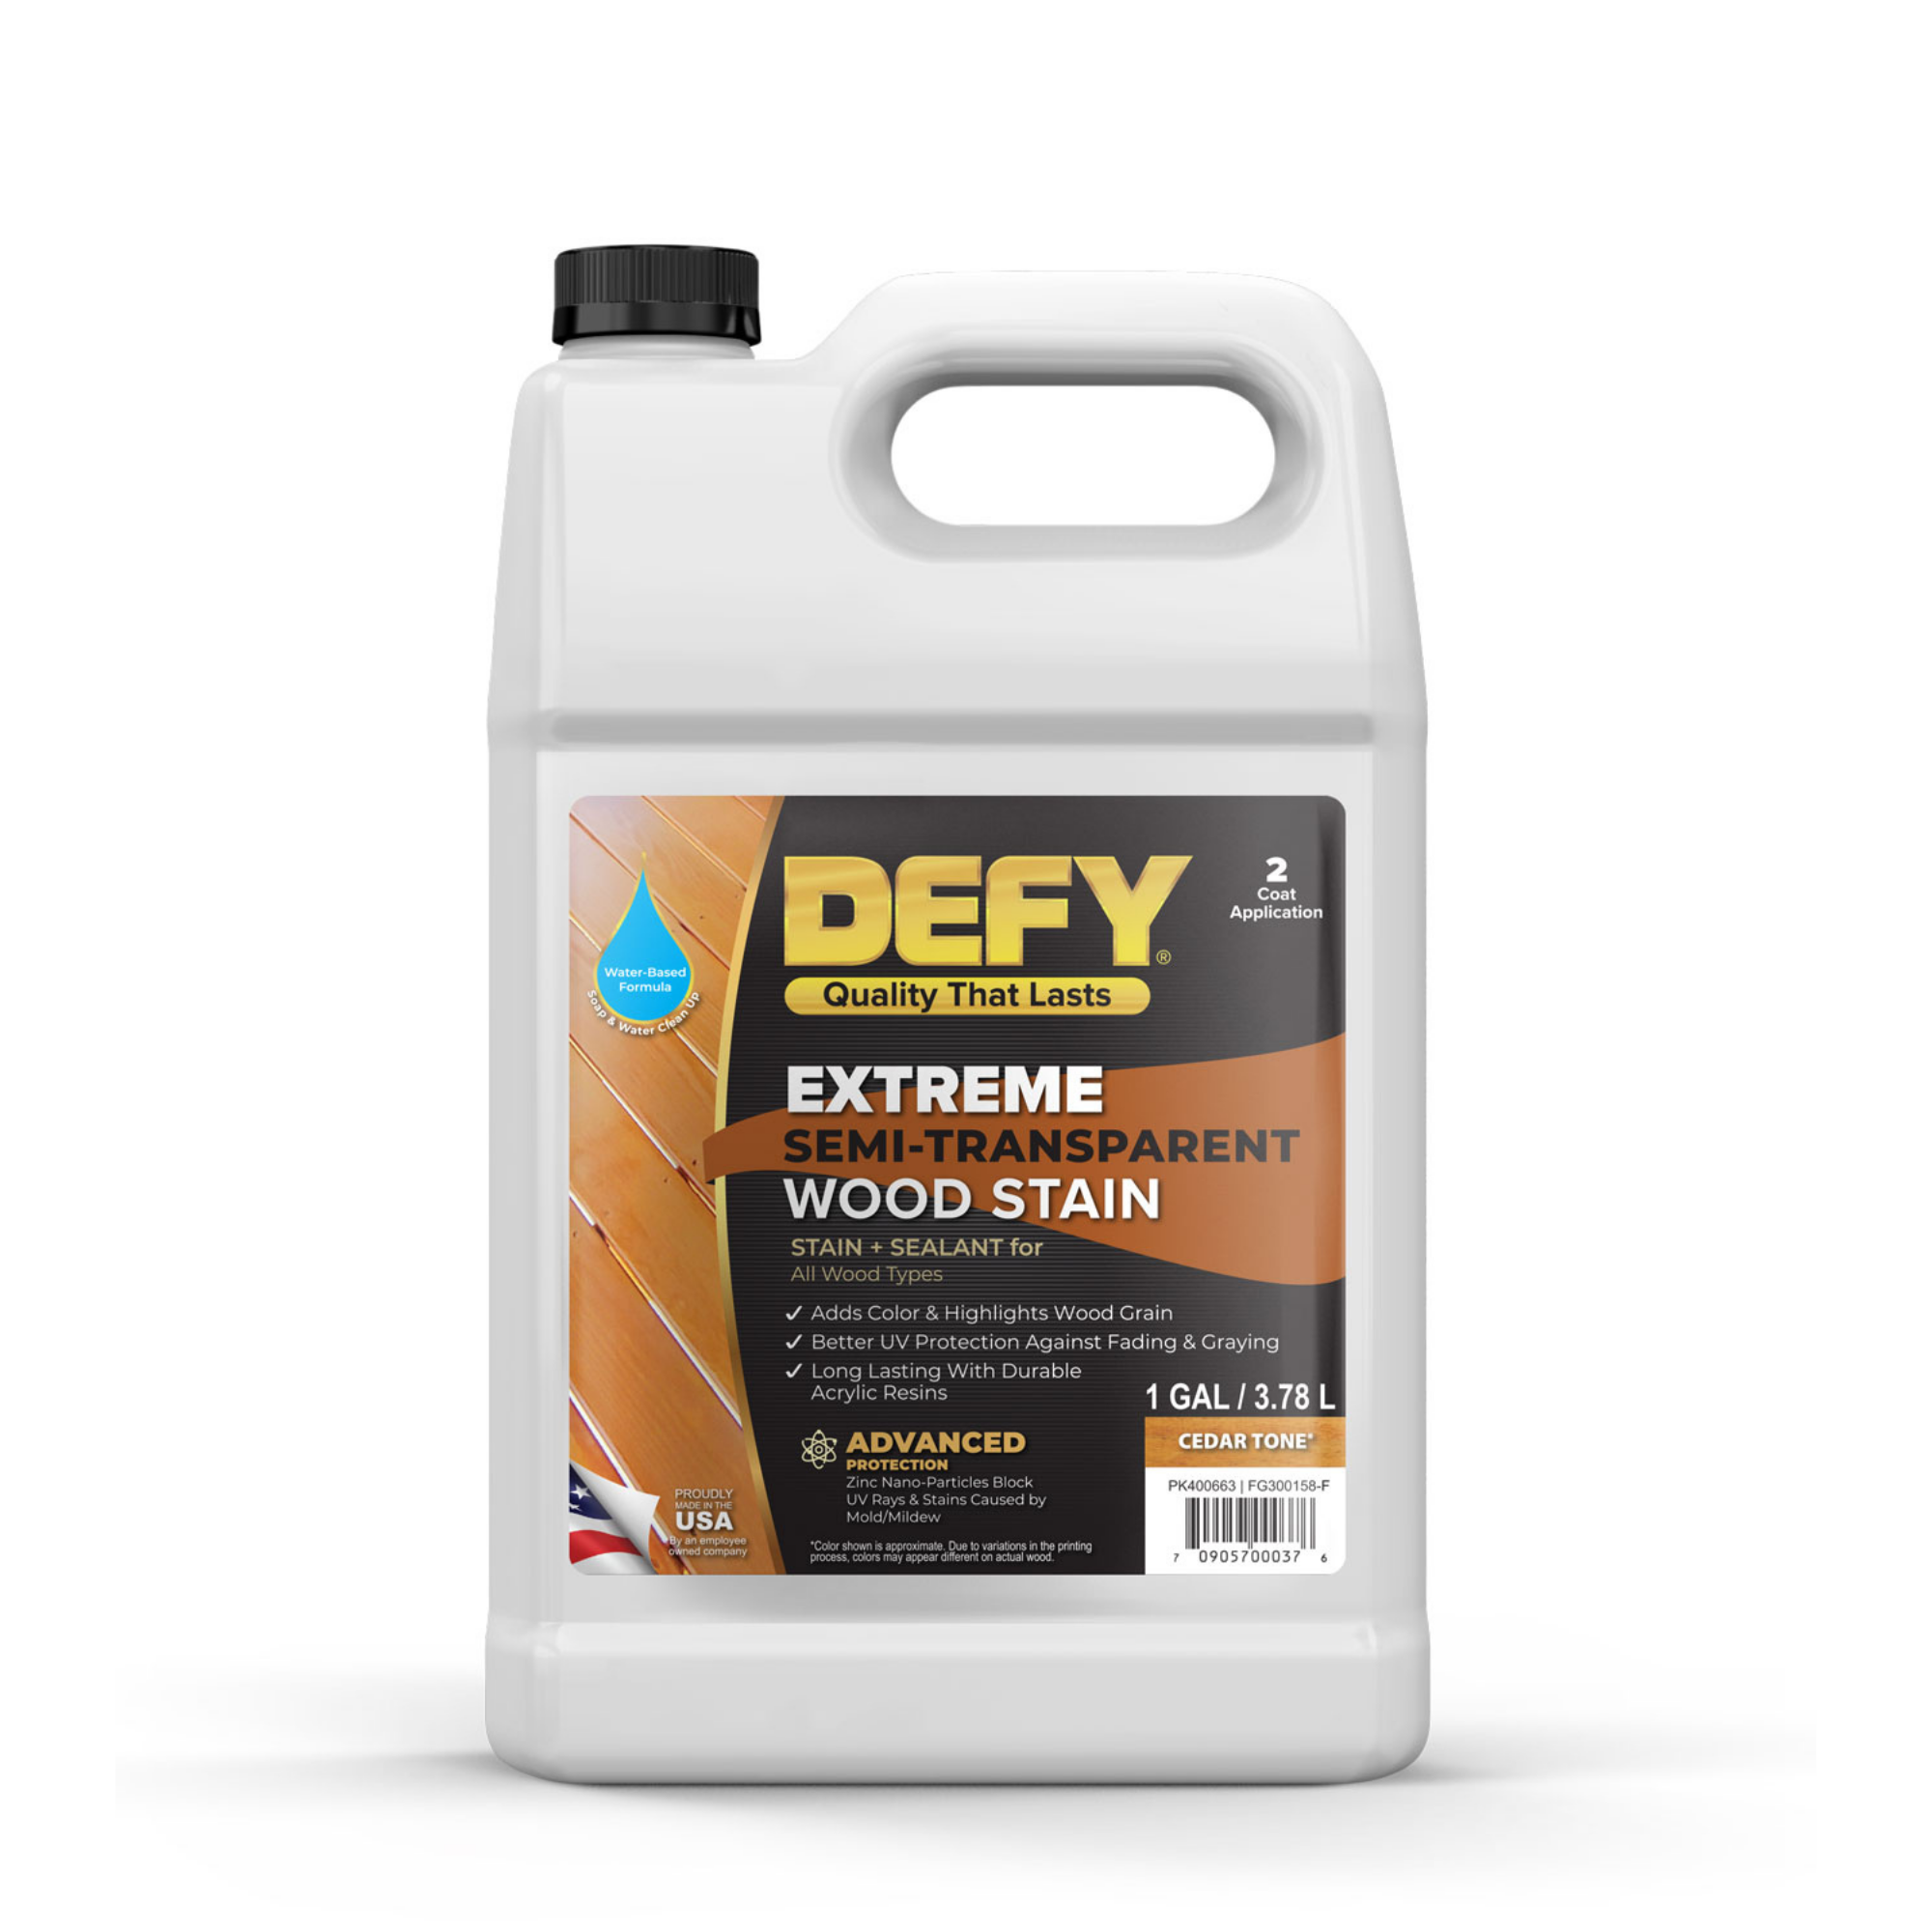 SEAL-ONCE MARINE Penetrating Wood Sealer, Waterproofer & Stain (5 Gallon).  Water-Based, Ultra-low VOC formula for high-moisture areas to protect wood